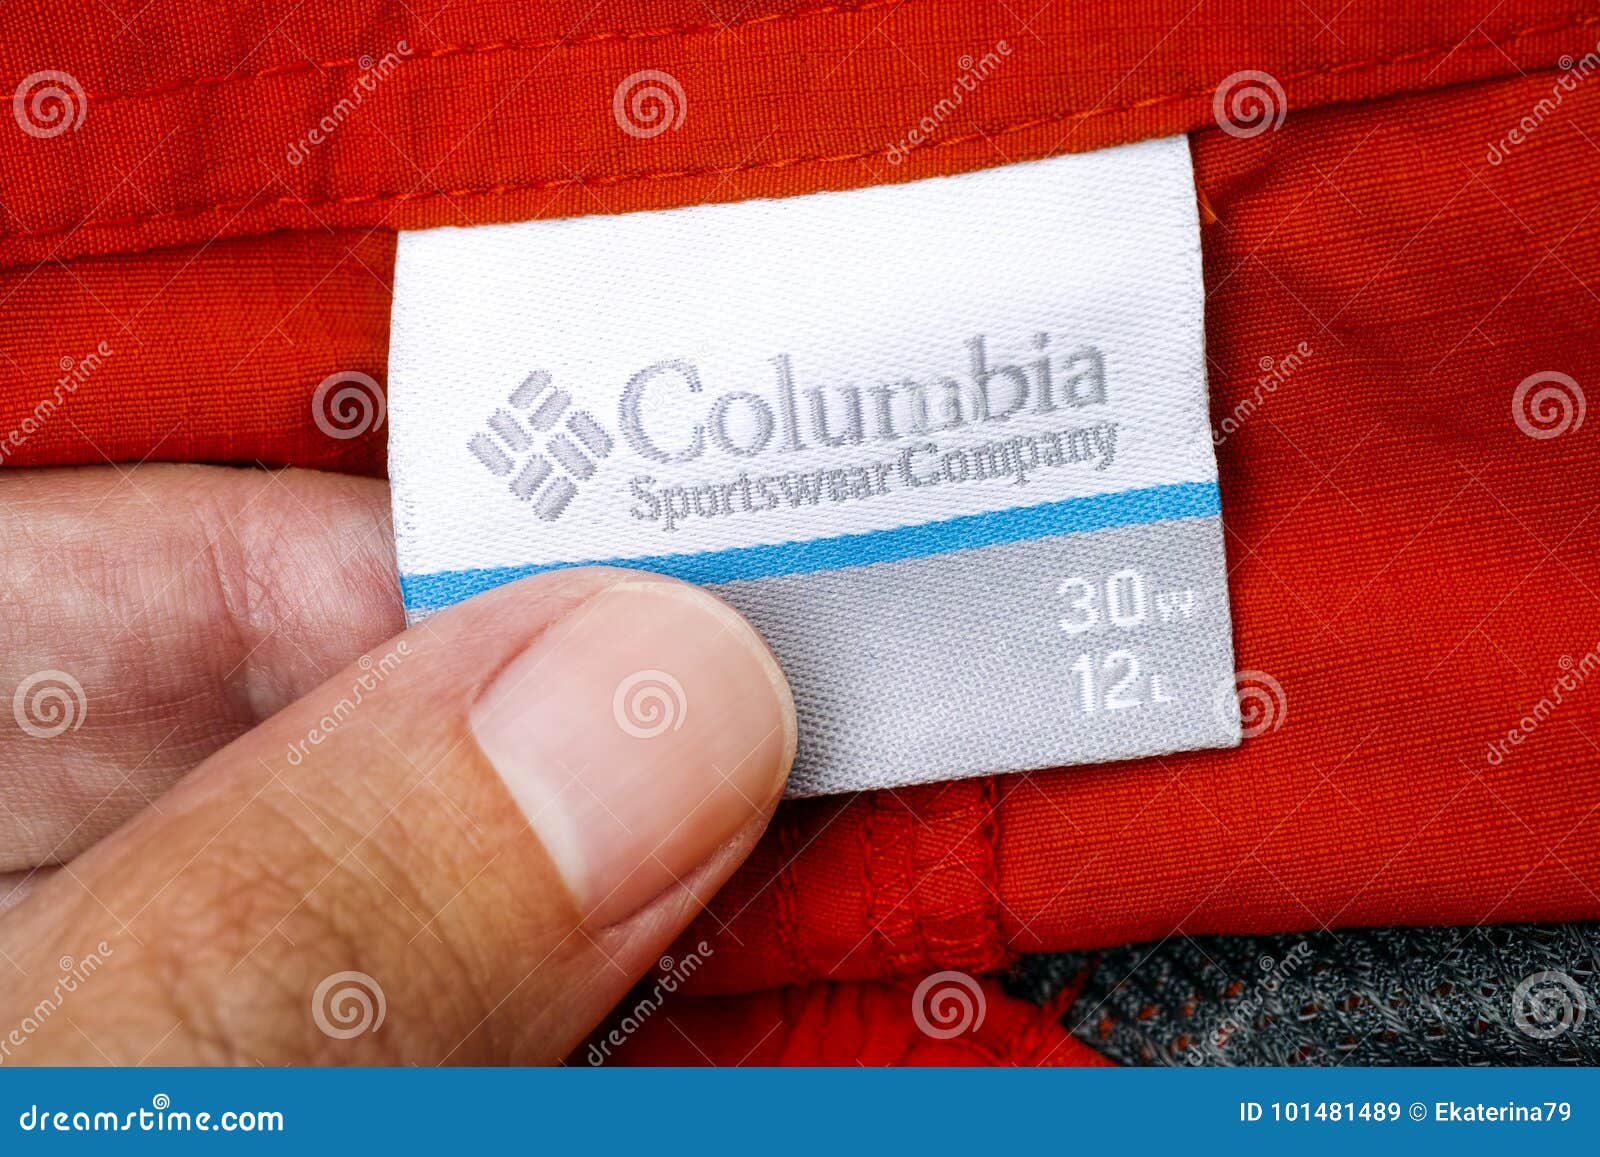 Person Hand with Columbia Sportswear Company Clothes Label. Editorial Stock  Image - Image of editorial, label: 101481489